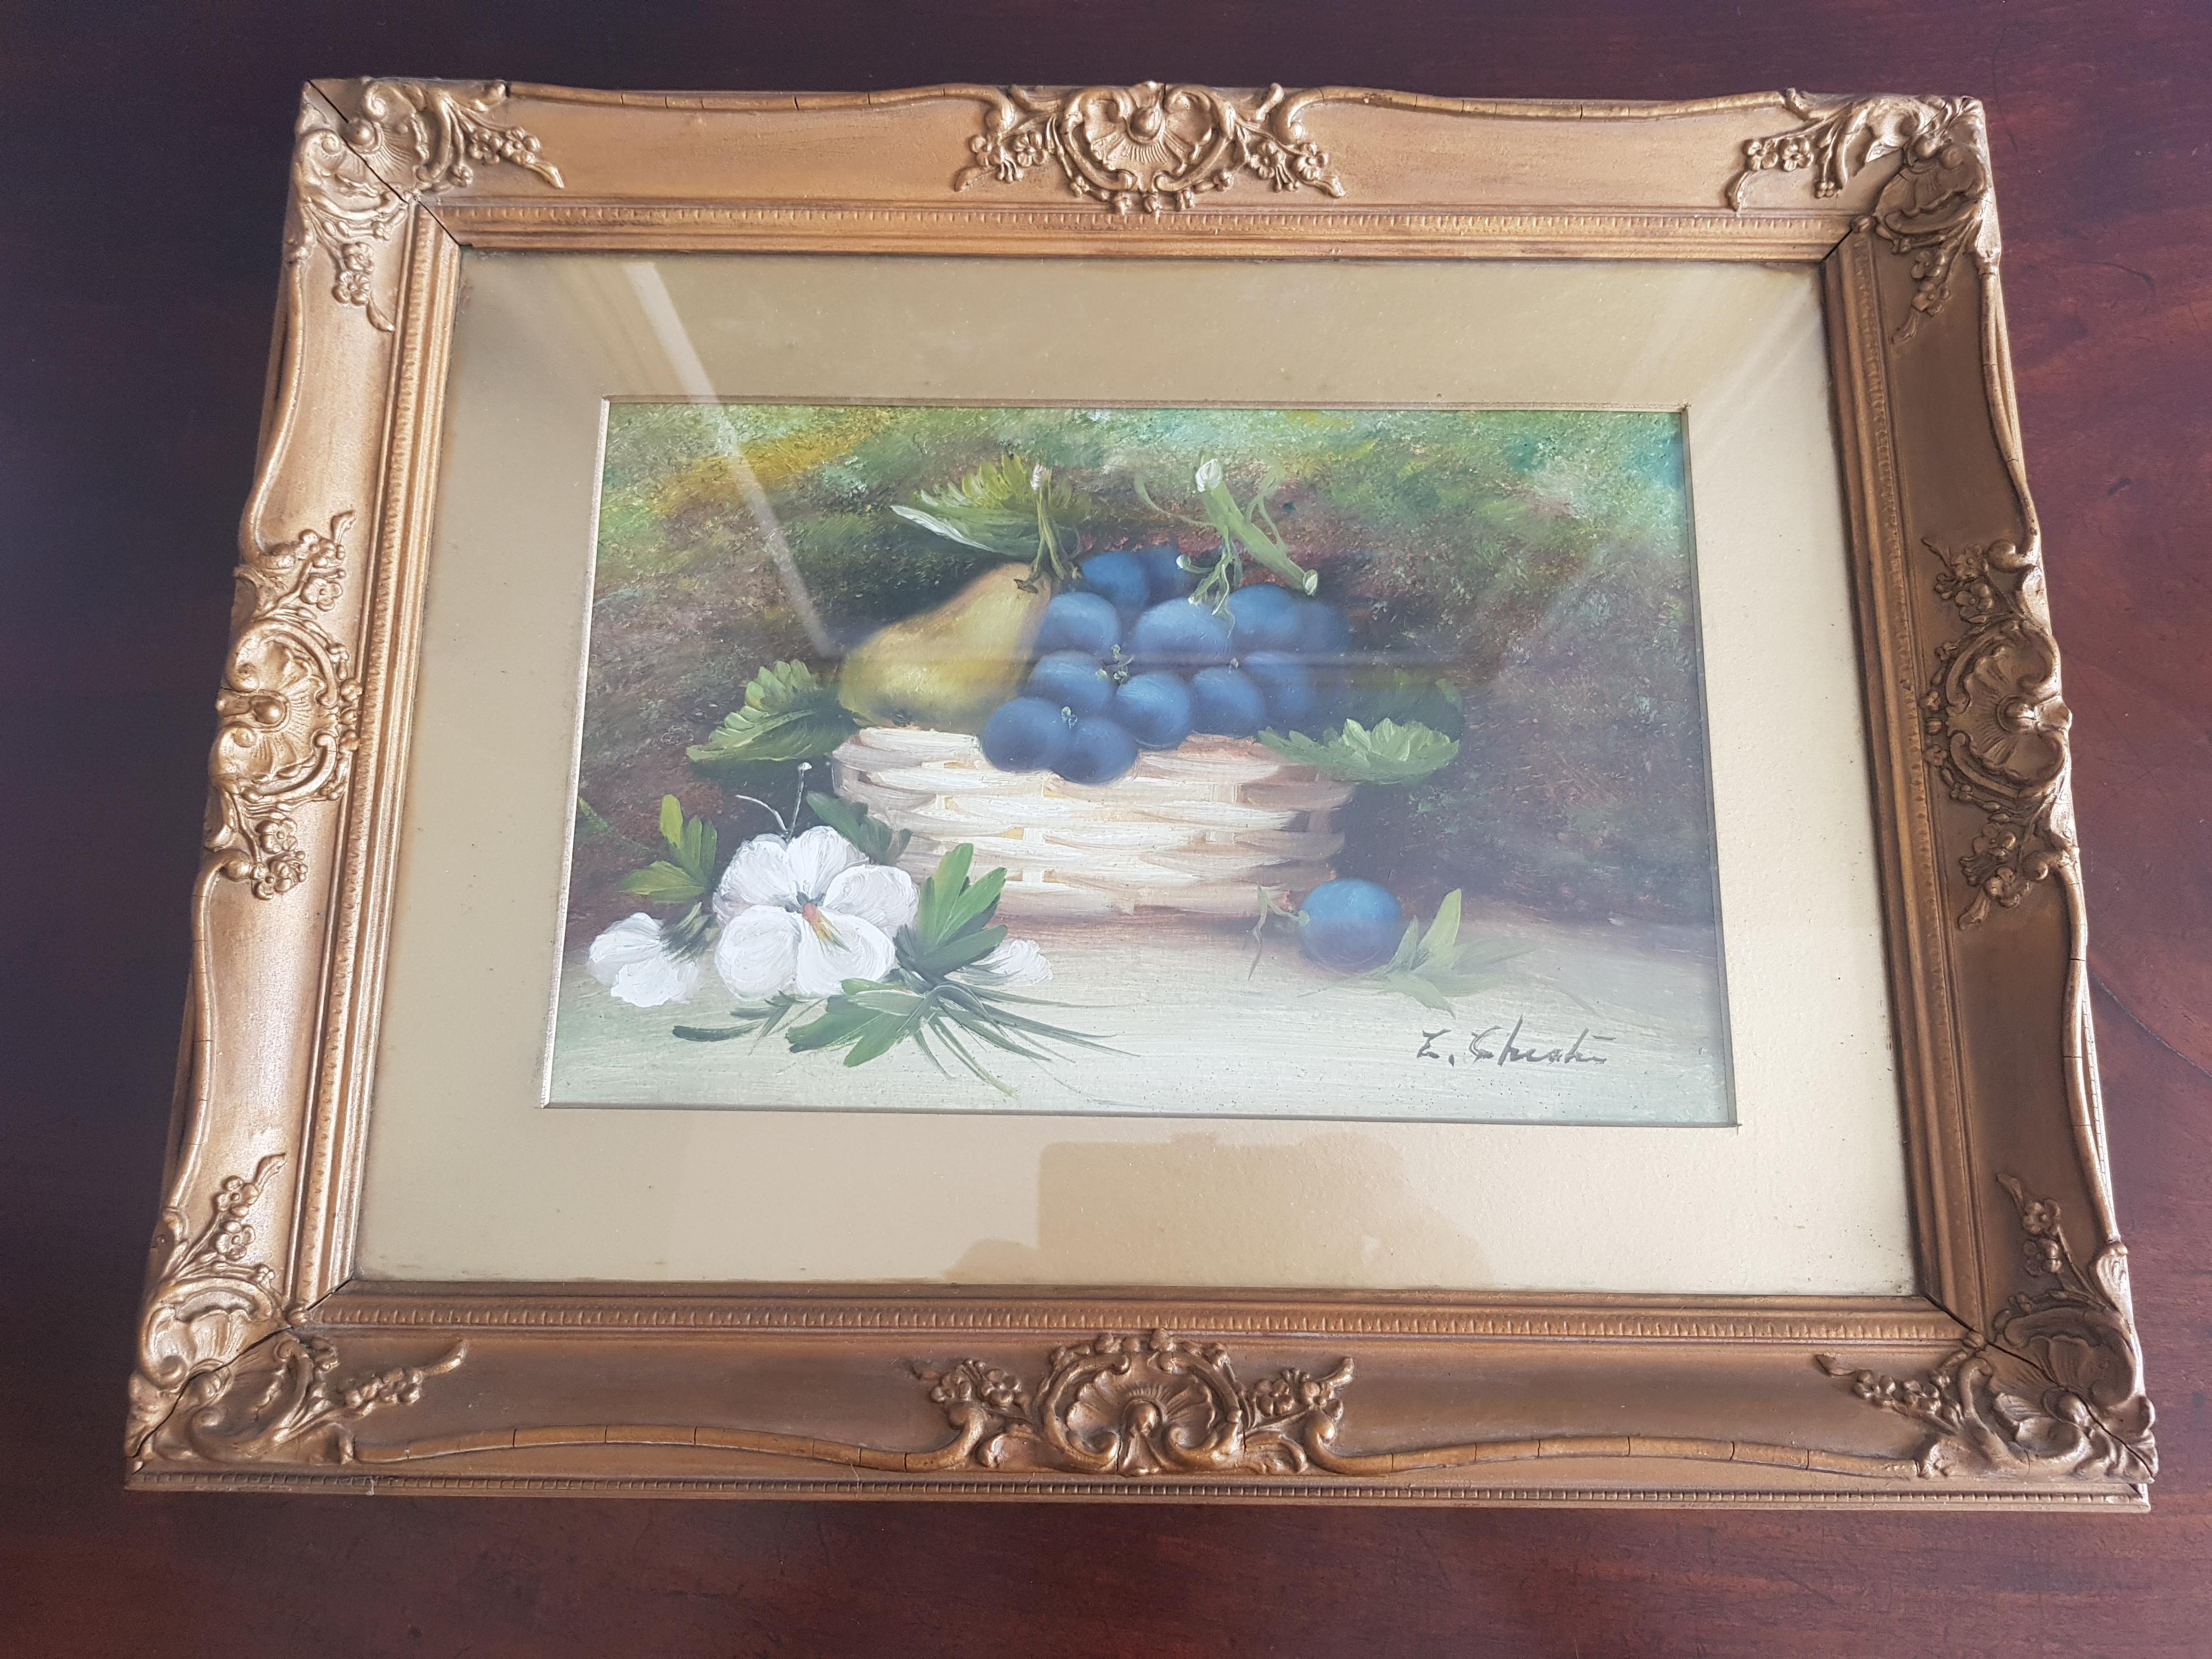 Pair of Early 20th Century Gold Gilt Framed Paintings by E. Chester In Fair Condition For Sale In Dromod, Co. Leitrim